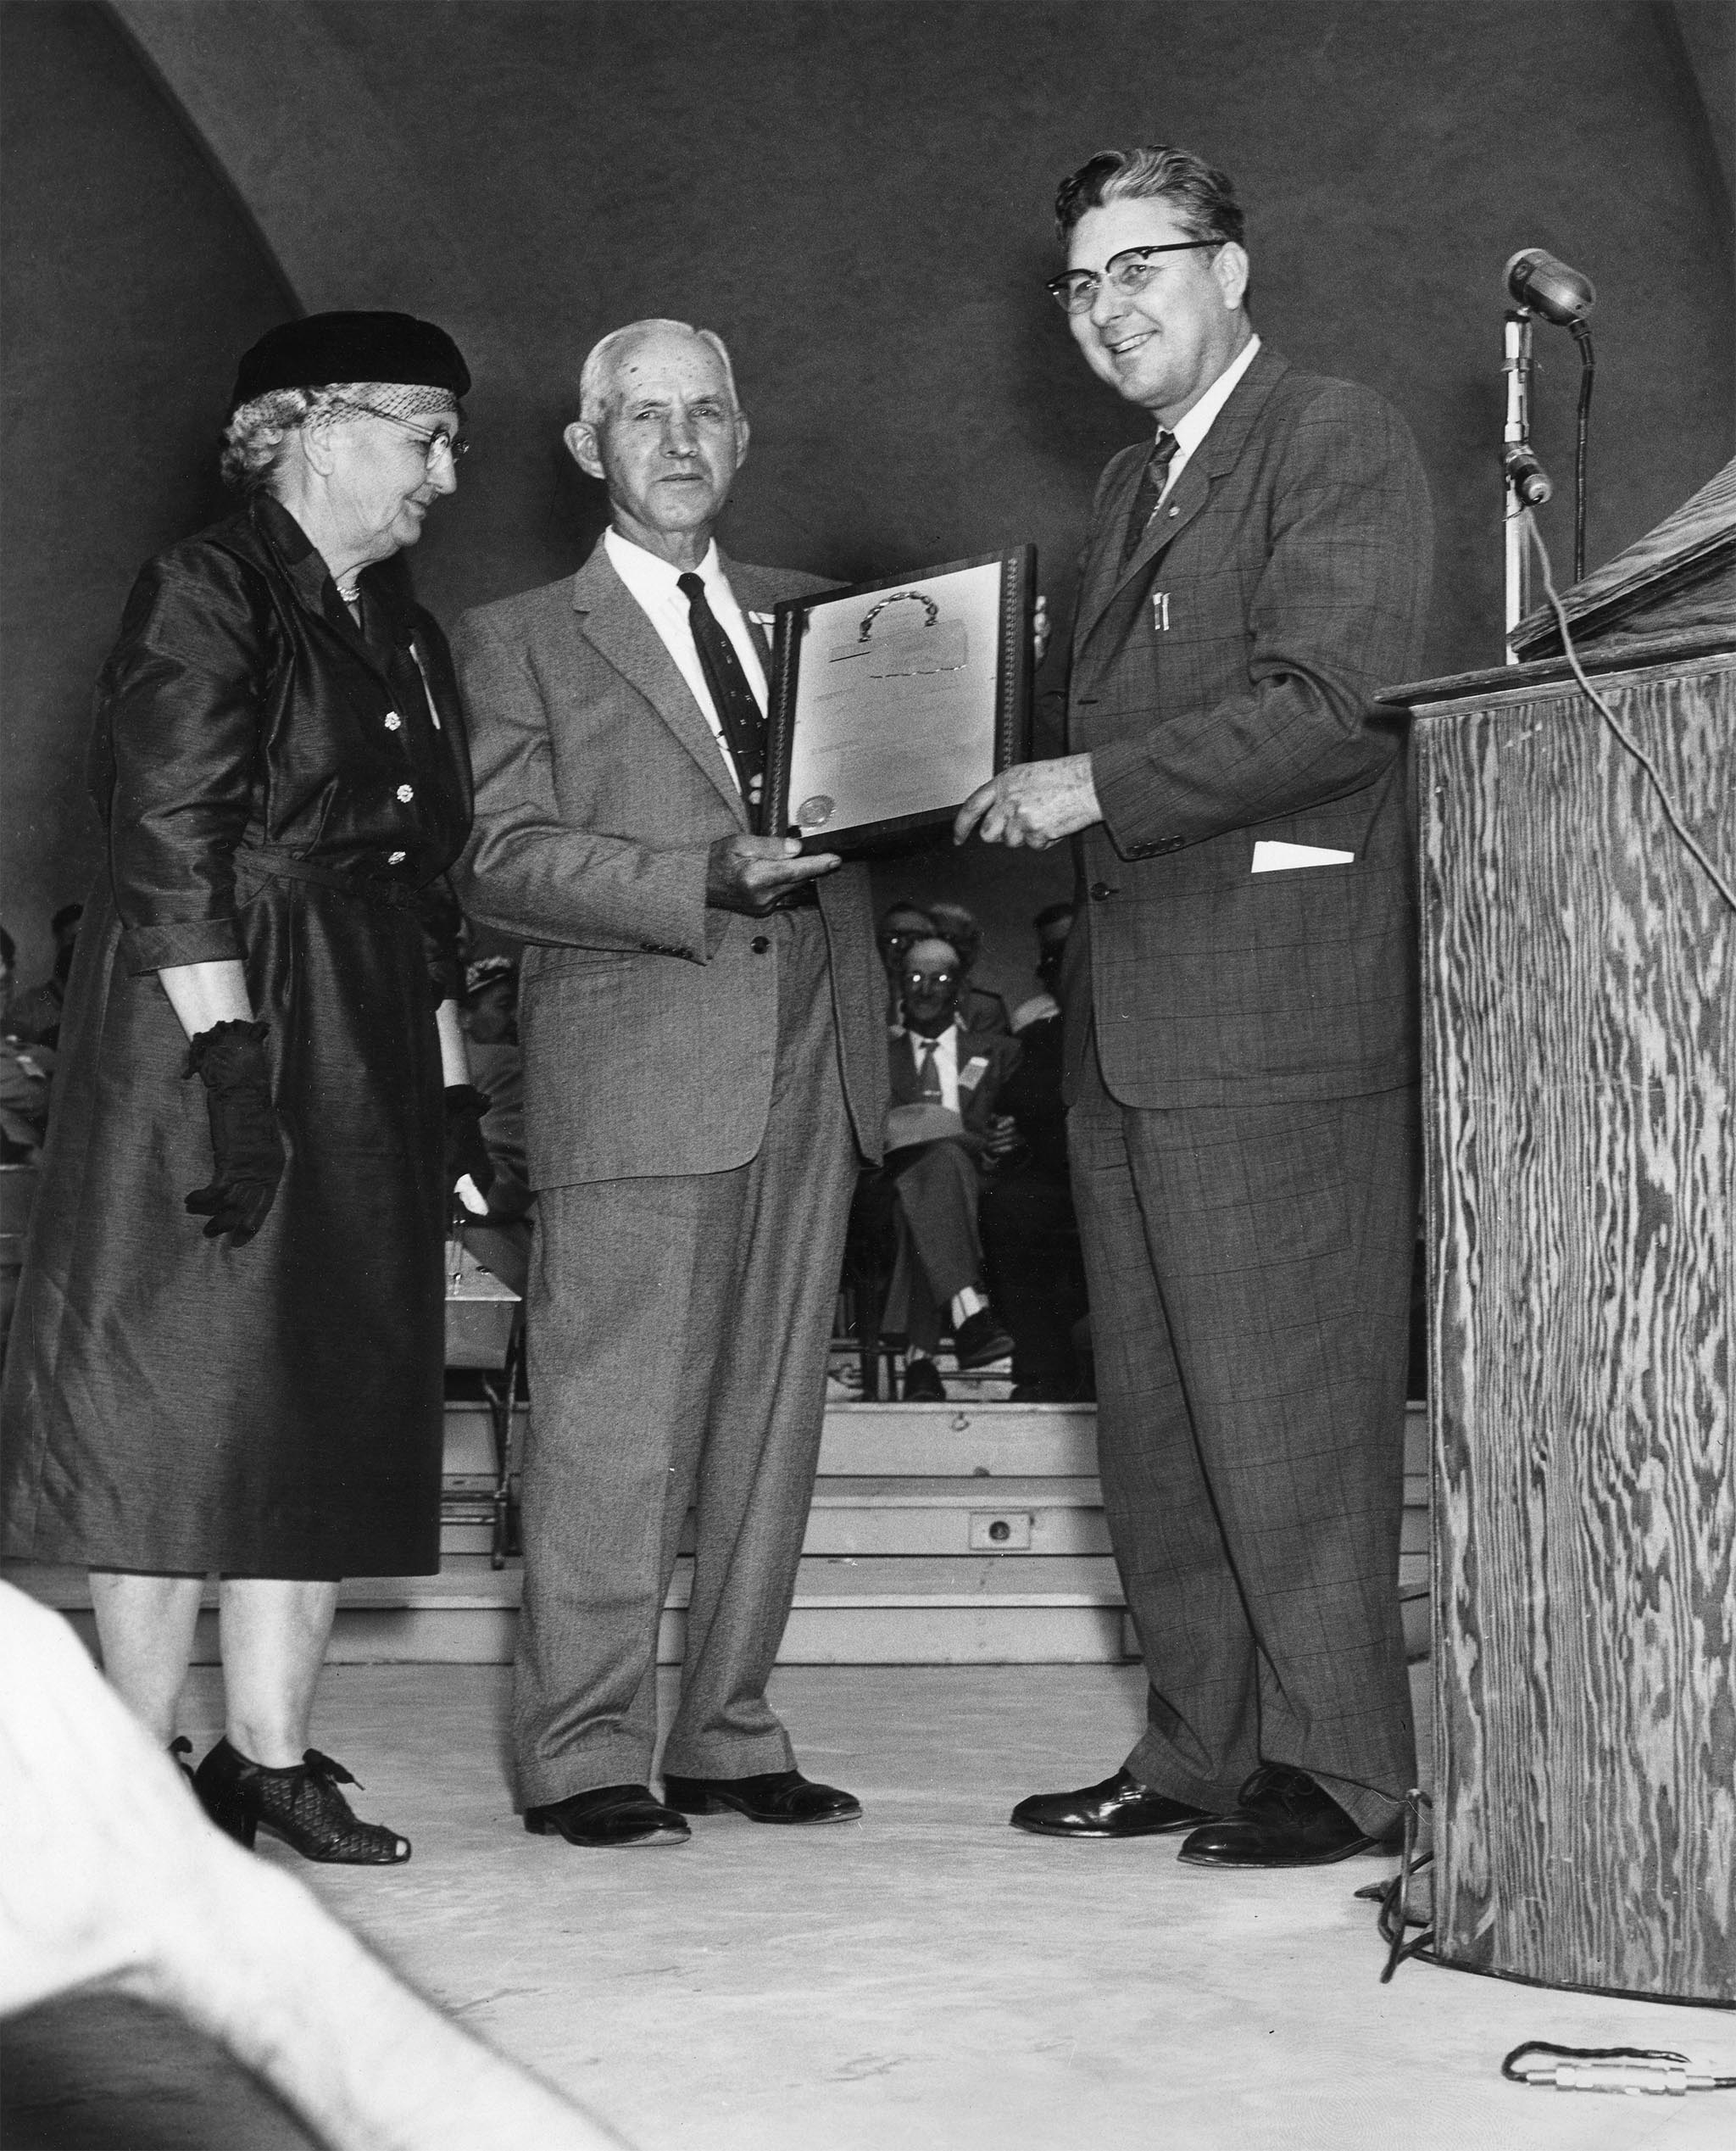 In 1957, the State Fair of Oklahoma asked Farm Bureau to participate in a special Farmers Day at the fair and conduct county contests to select a Golden Anniversary Farm Family. The award was designed to recognize the type of rural people who built Oklahoma in its first 50 years of statehood. The contest was limited to those who had lived on an Oklahoma farm since 1907. A total of 45 county winners were reported by county Farm Bureaus in the contest. Pictured here is Gov. Raymond Gary (right) presenting a gold and silver plaque to the overall winner of the contest, Mr. and Mrs. Fred Graumann, in the bandshell of the State Fair of Oklahoma on September 26, 1957. This was the beginning of a Farm Family award program that continues to today.